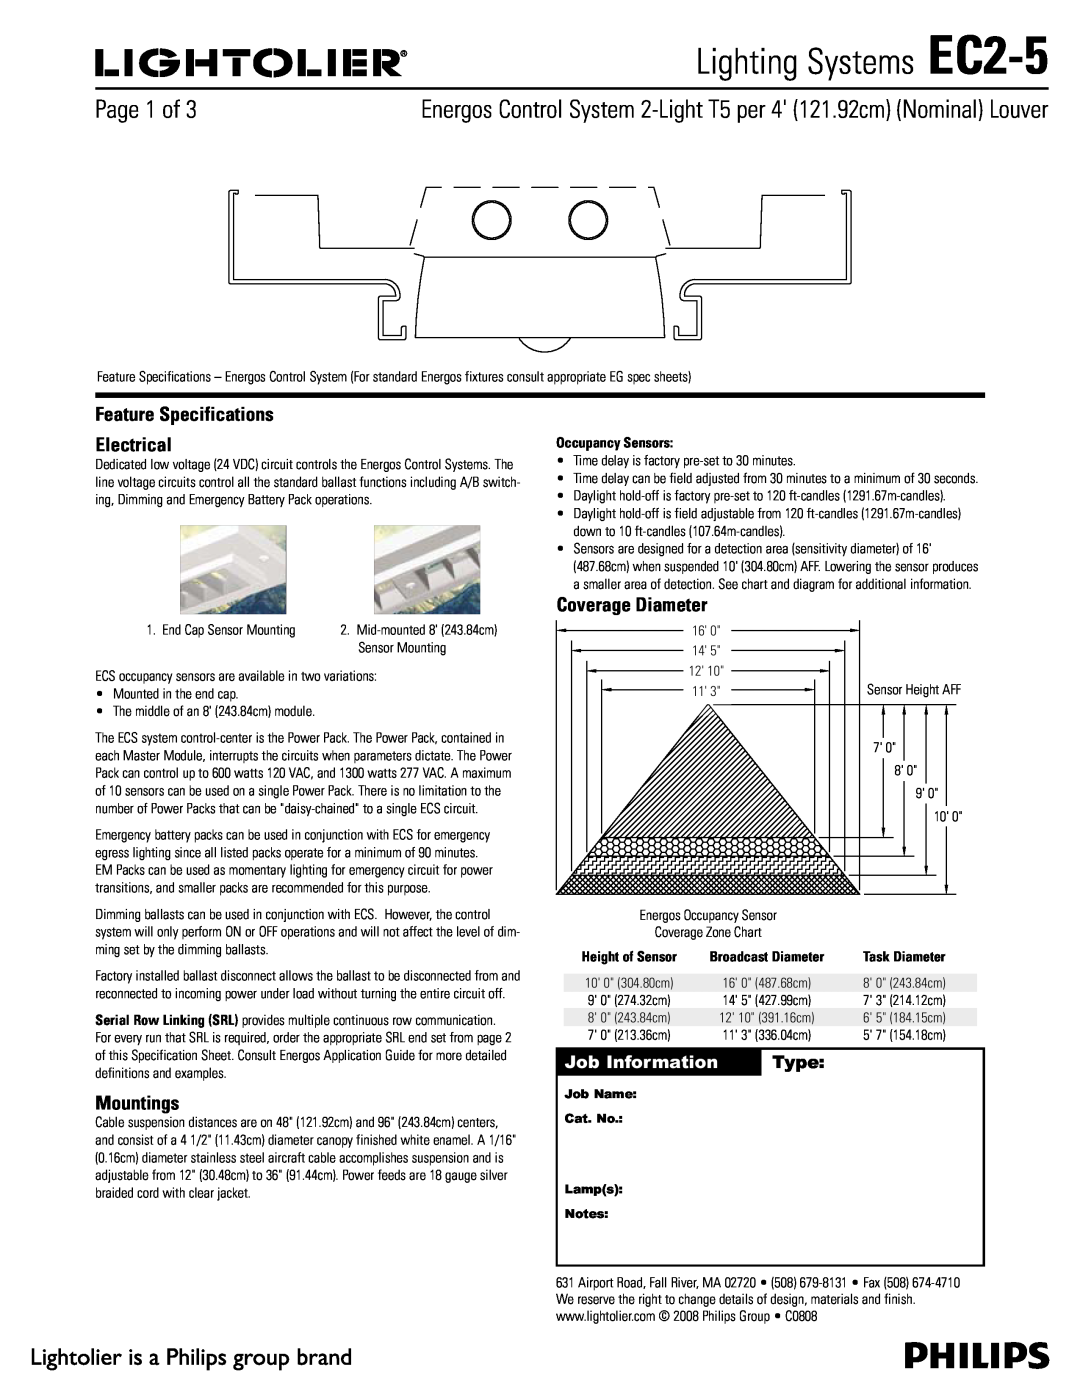 Lightolier specifications Lighting Systems EC2-5, Feature Specifications Electrical, Mountings, Coverage Diameter, Type 